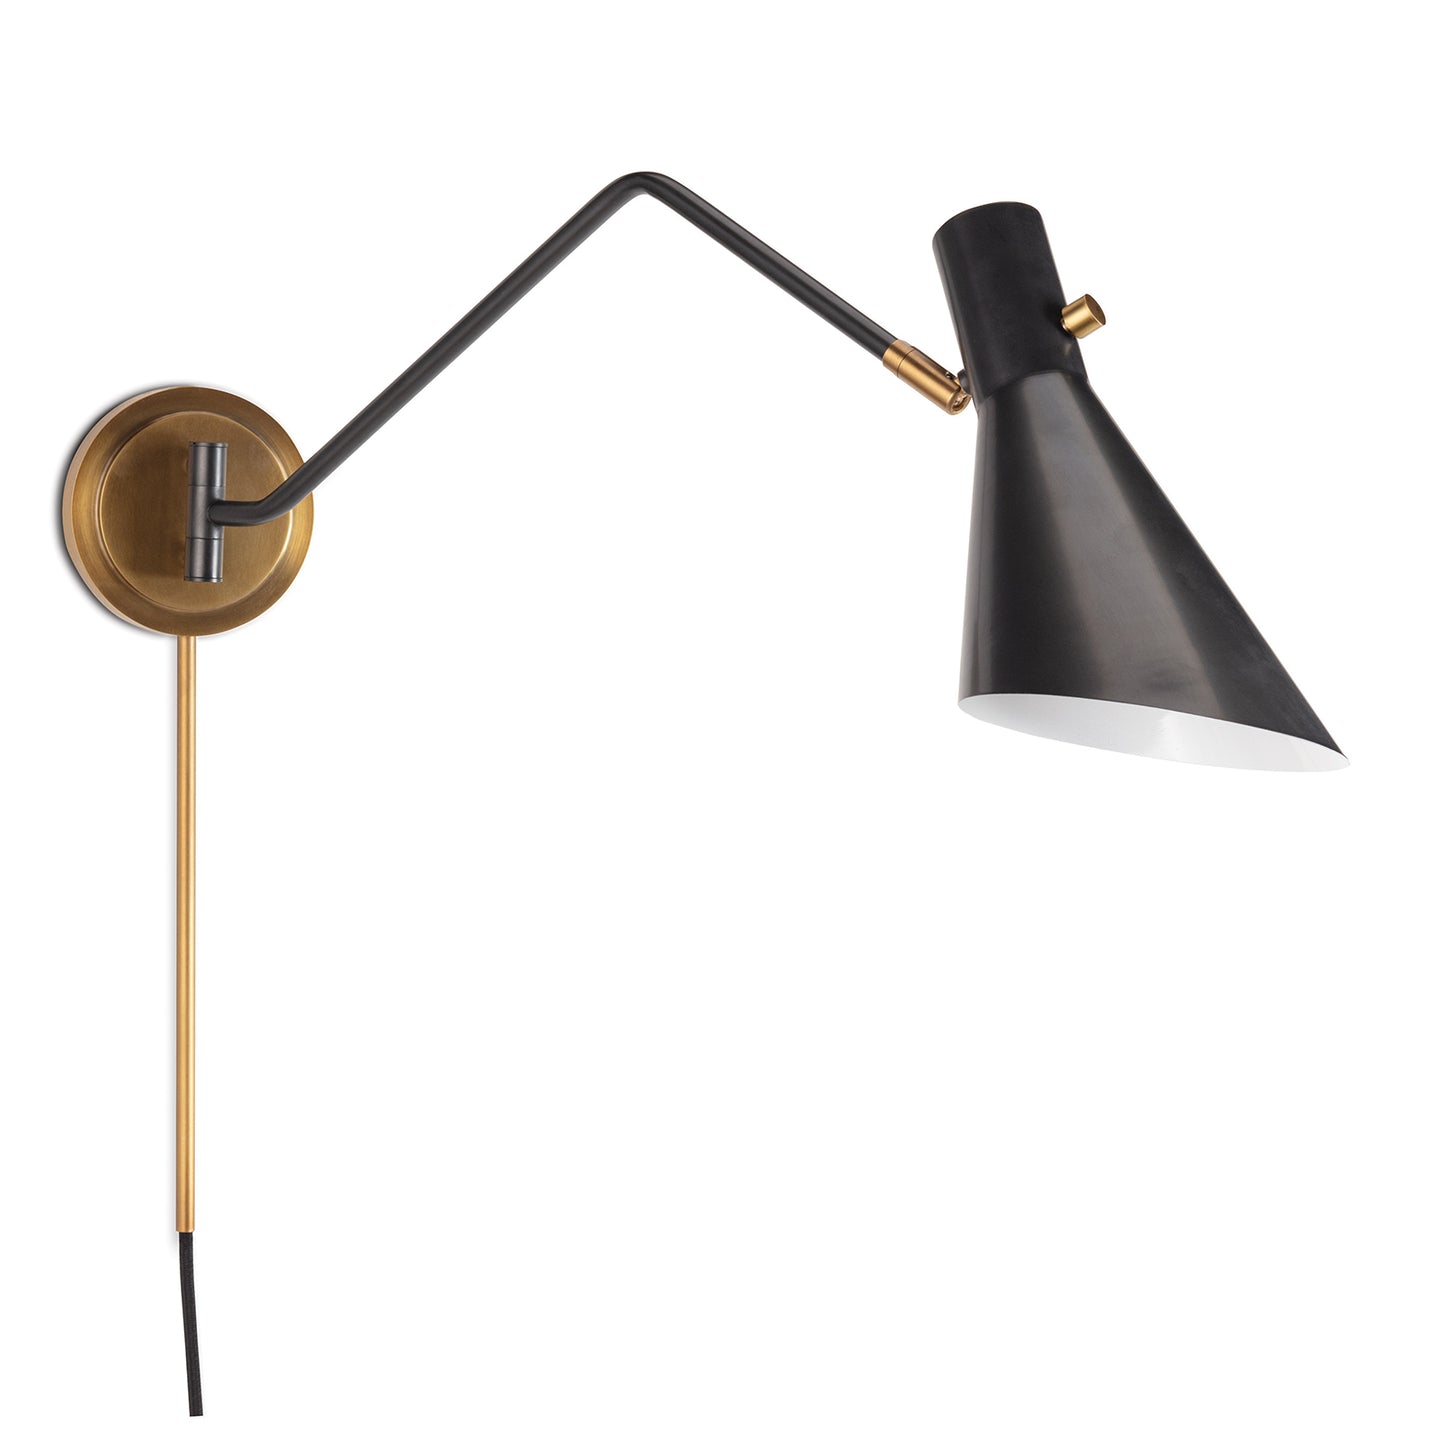 Regina Andrew Spyder Single Arm Sconce in Blackened Brass and Natural Brass